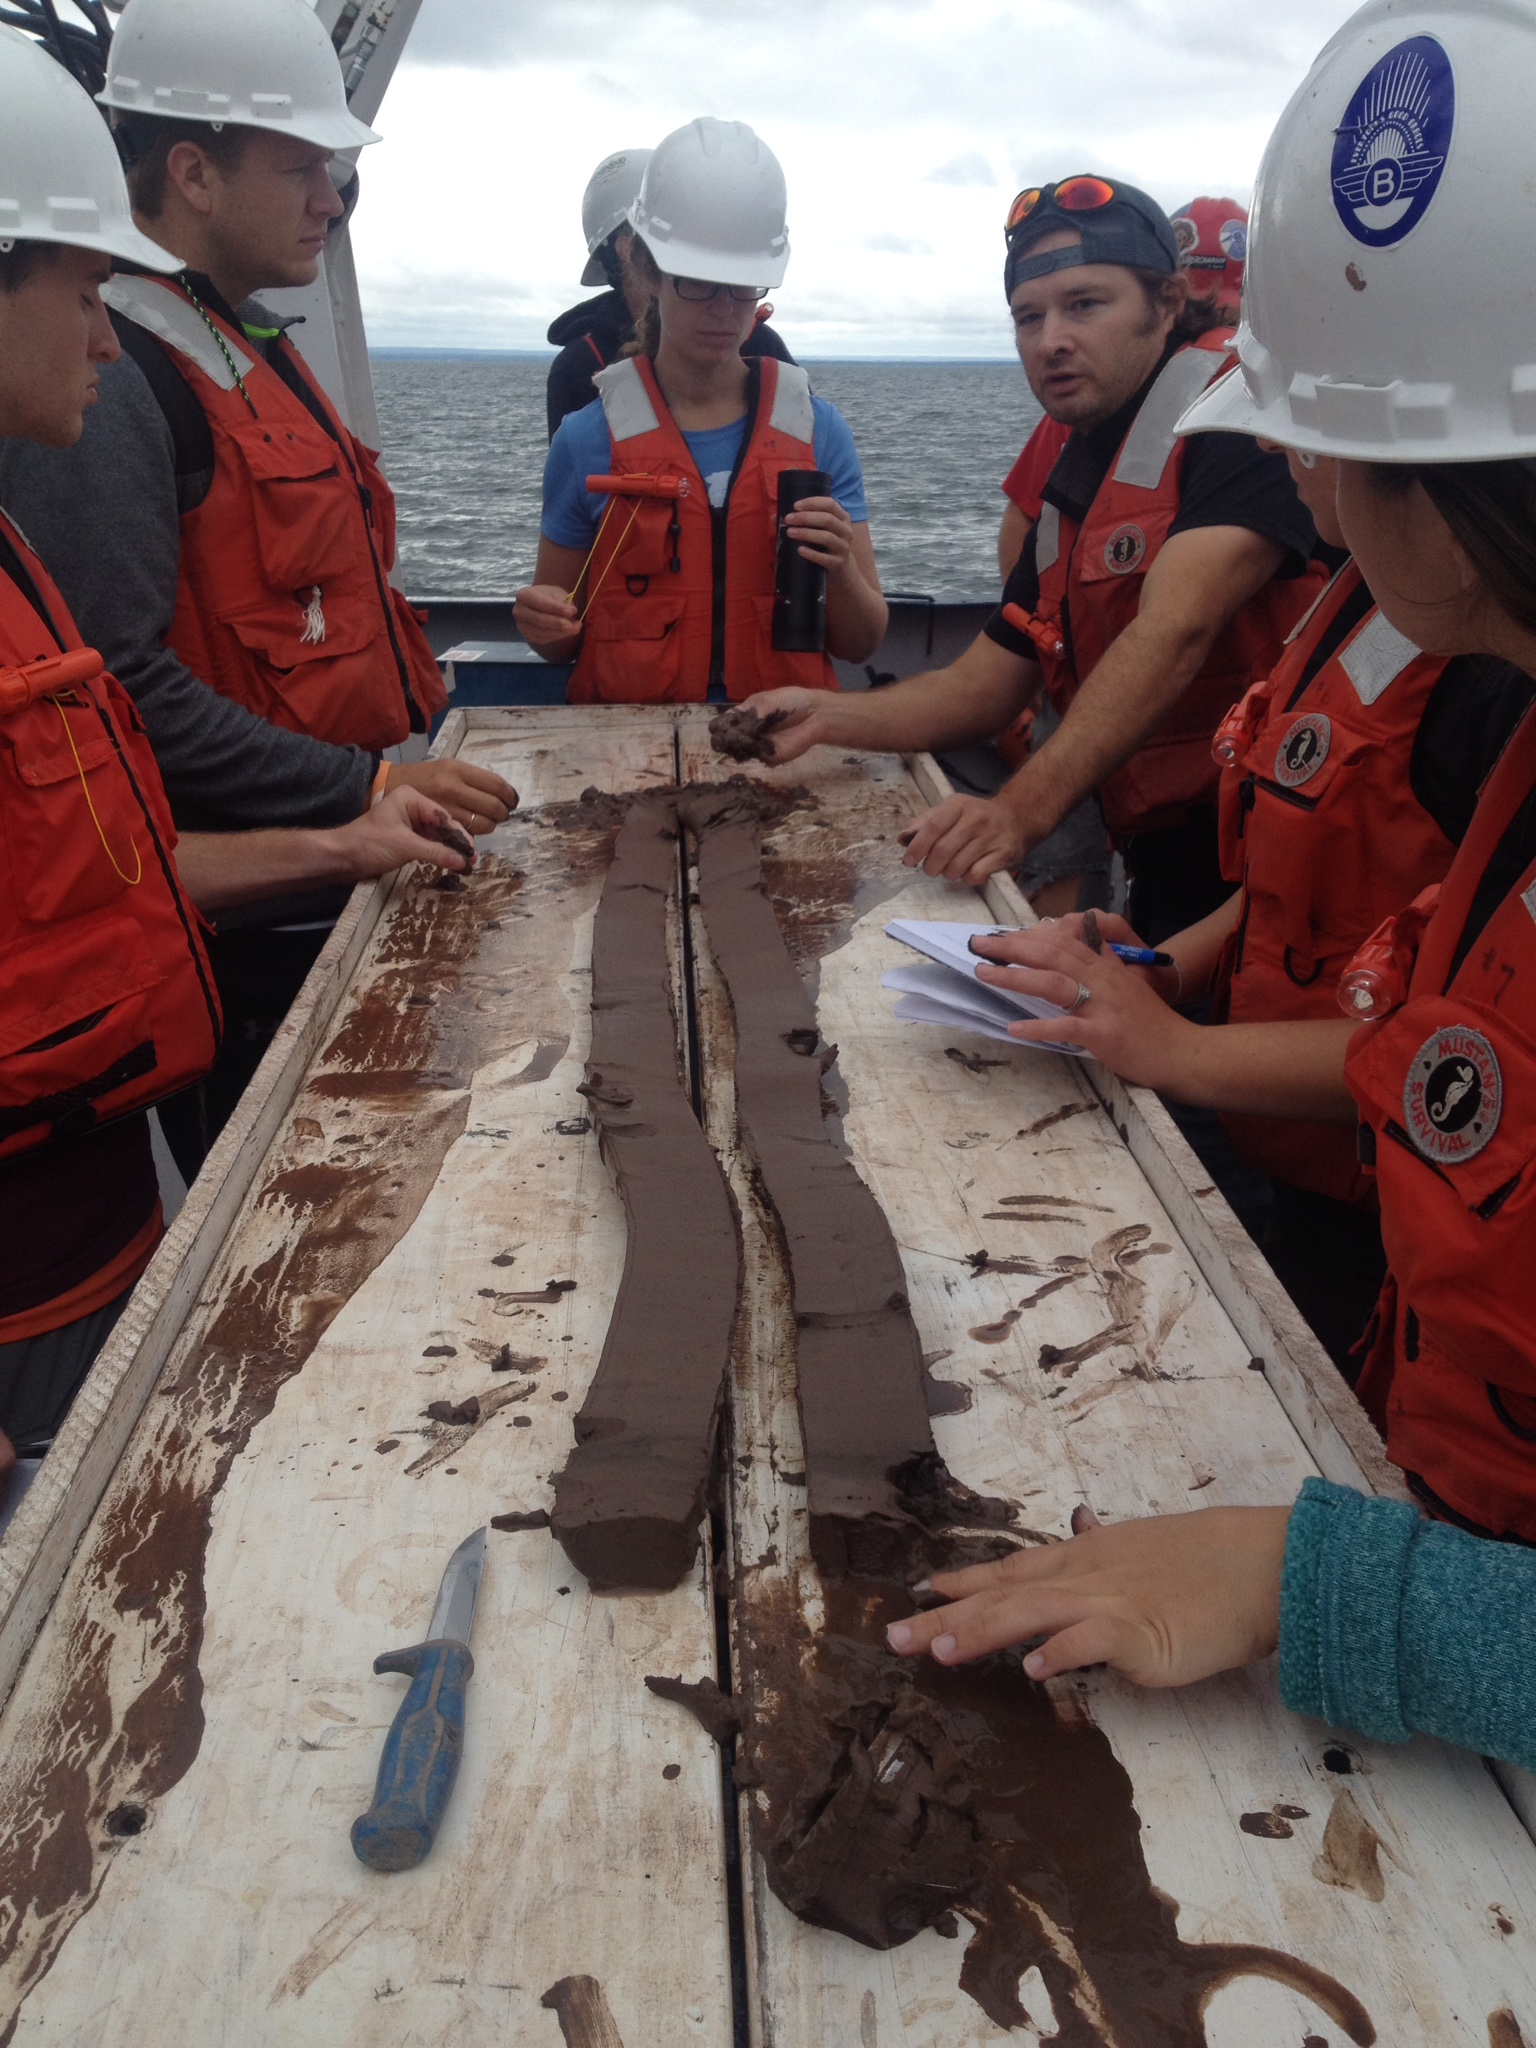 A field learning experience with professors and students gathered around a lake core